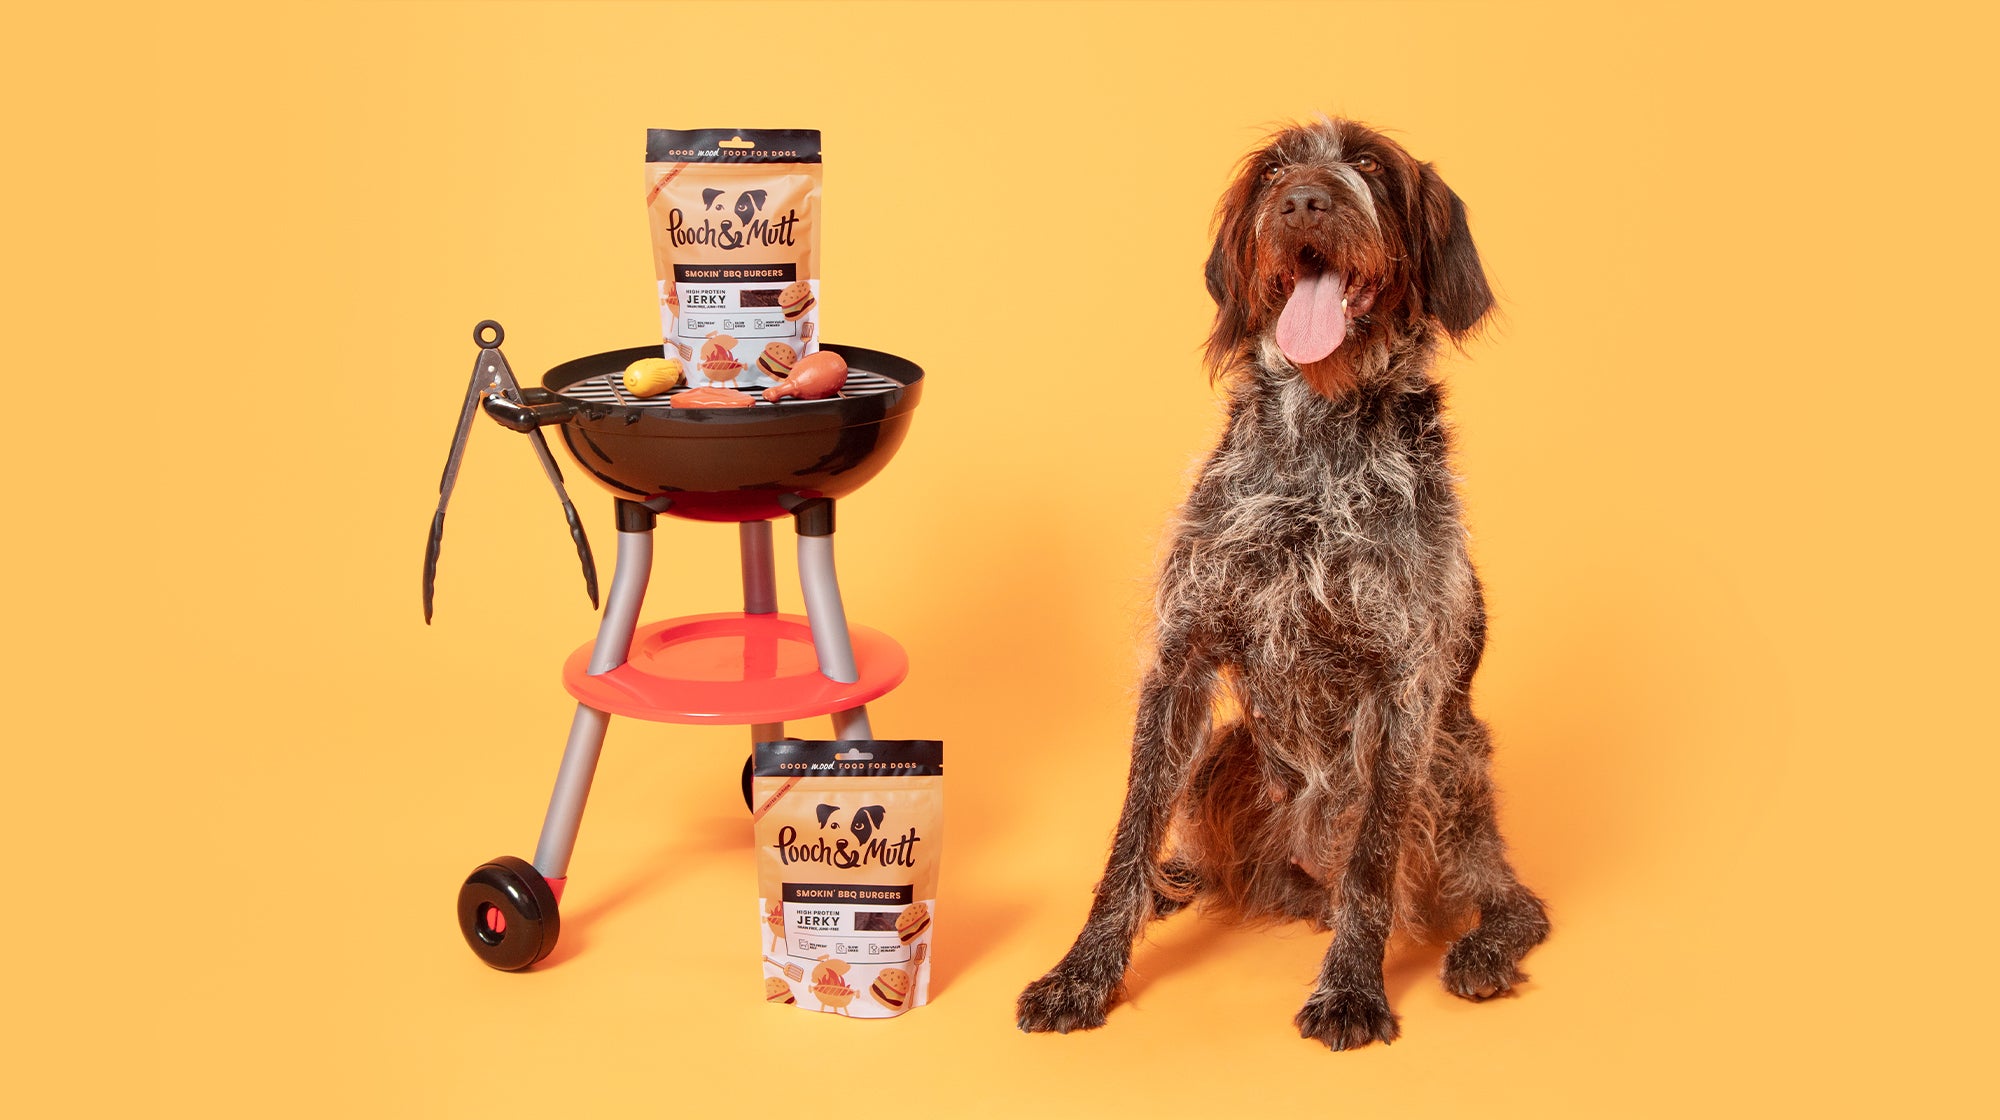 A shaggy dog with its tongue hanging out, next to a barbecue with packets of Pooch & Mutt treats, against a yellow background